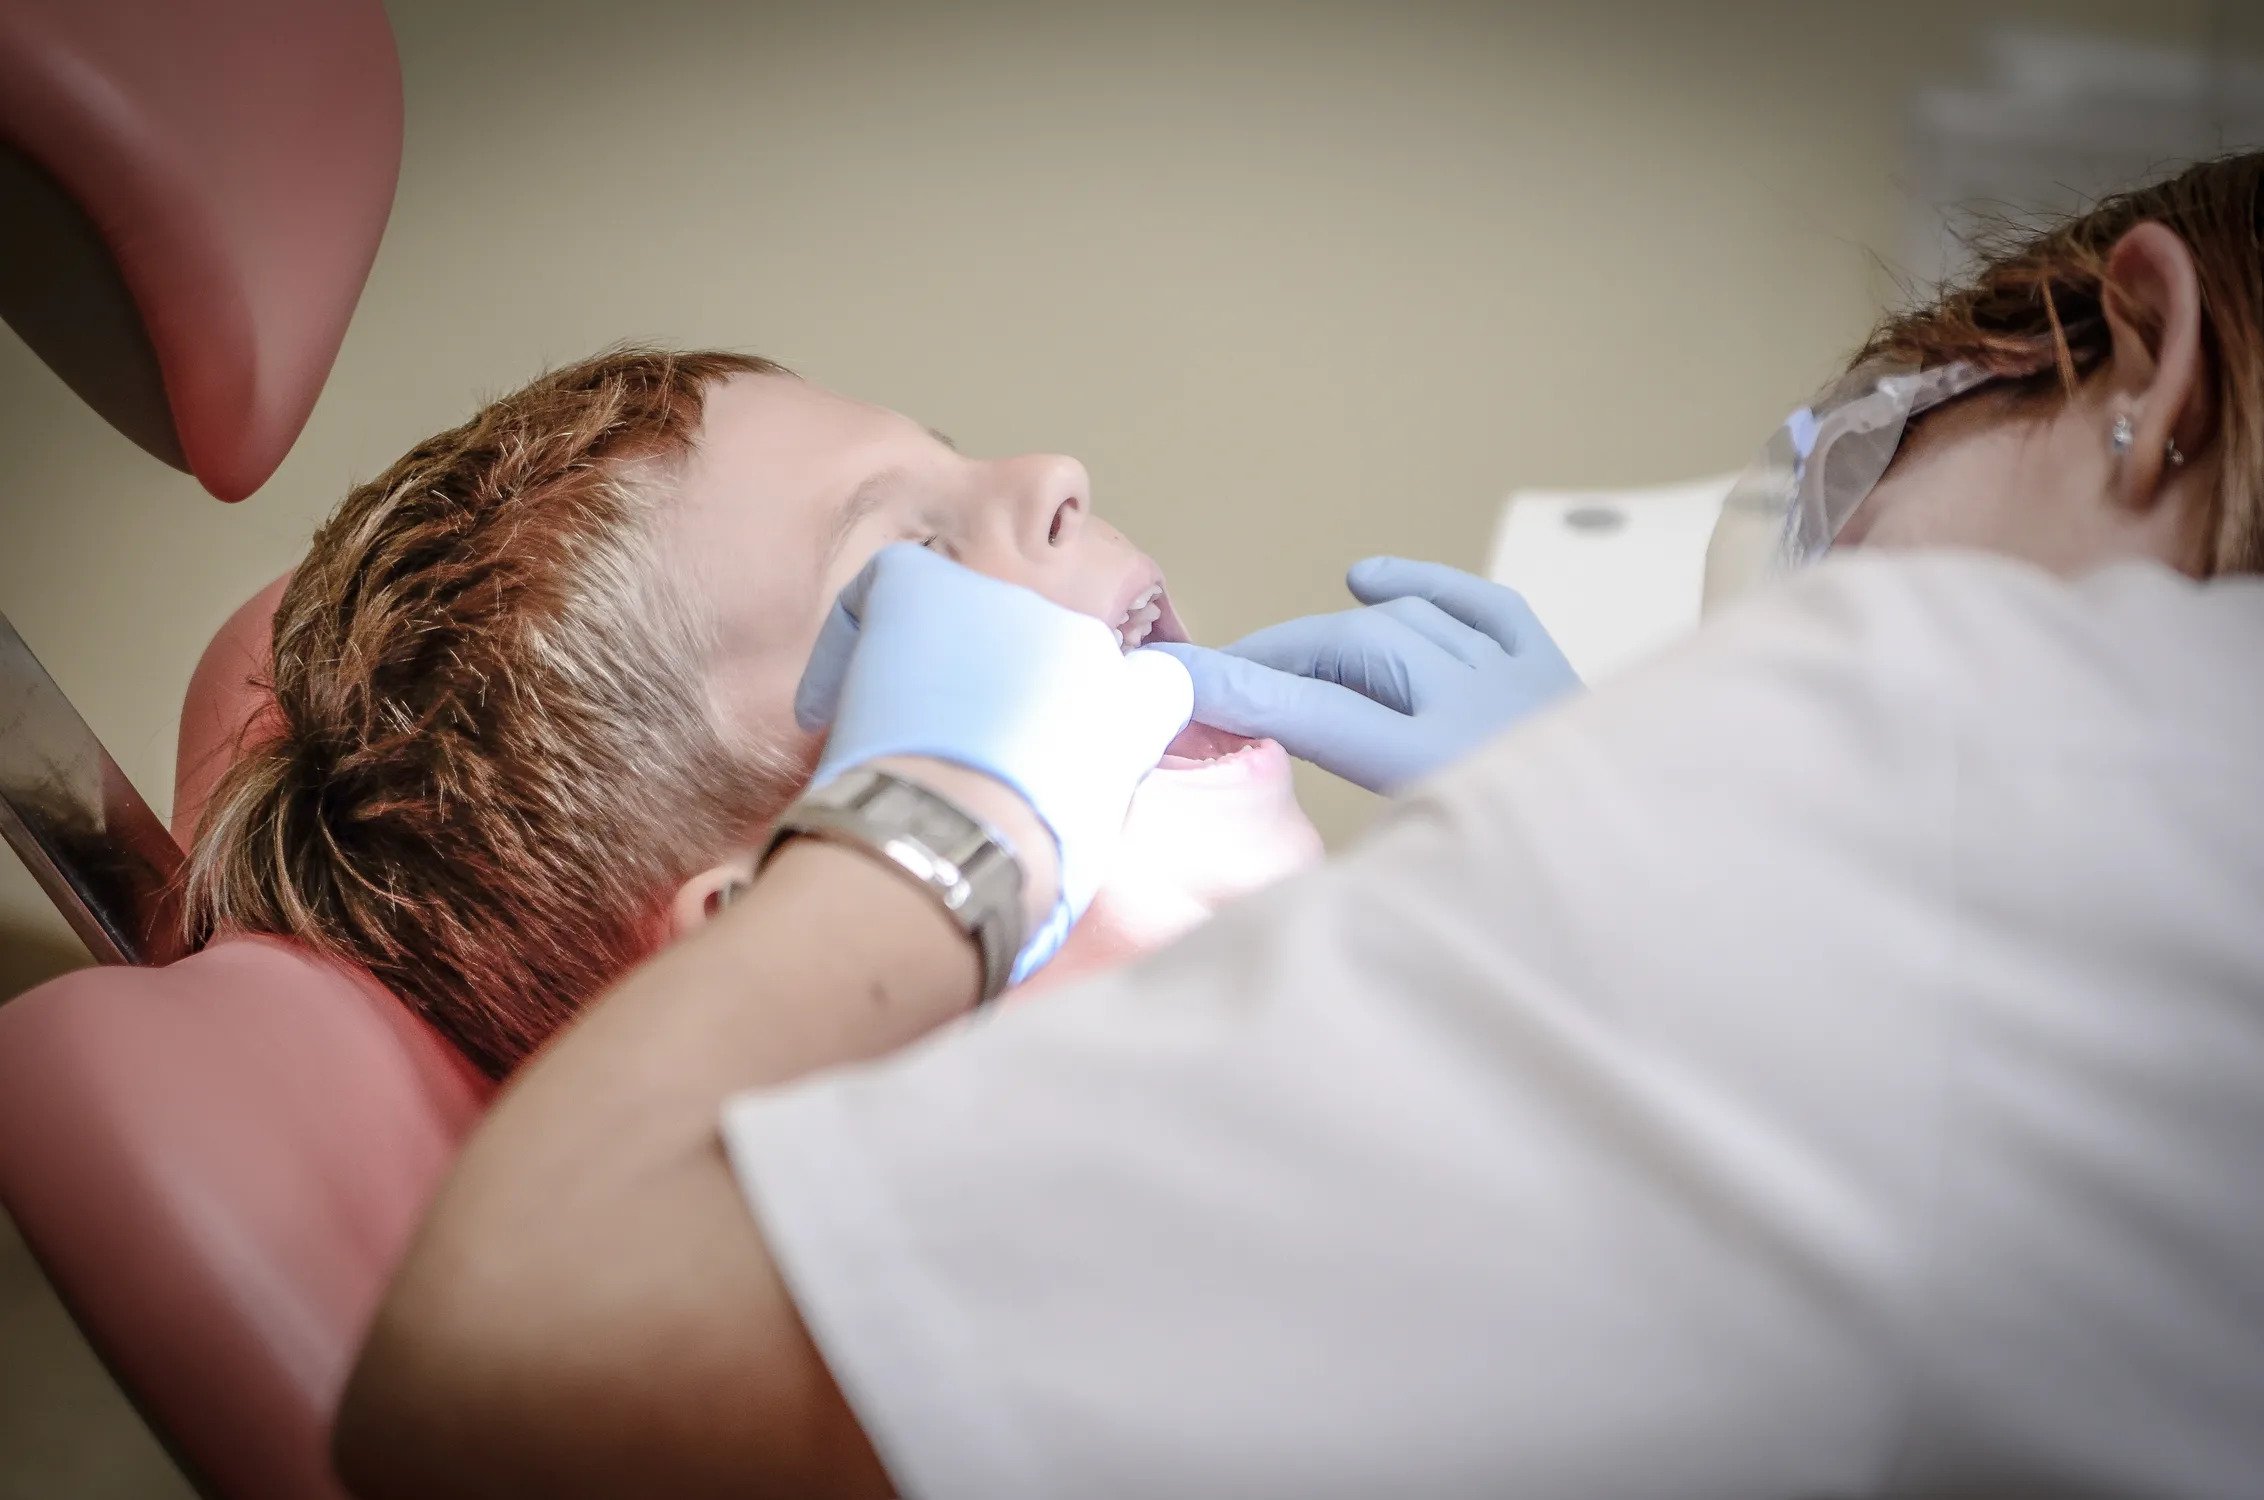 Dental Consumables Market is Anticipated to Expand at a CAGR of 5.4% from 2019 to 2027